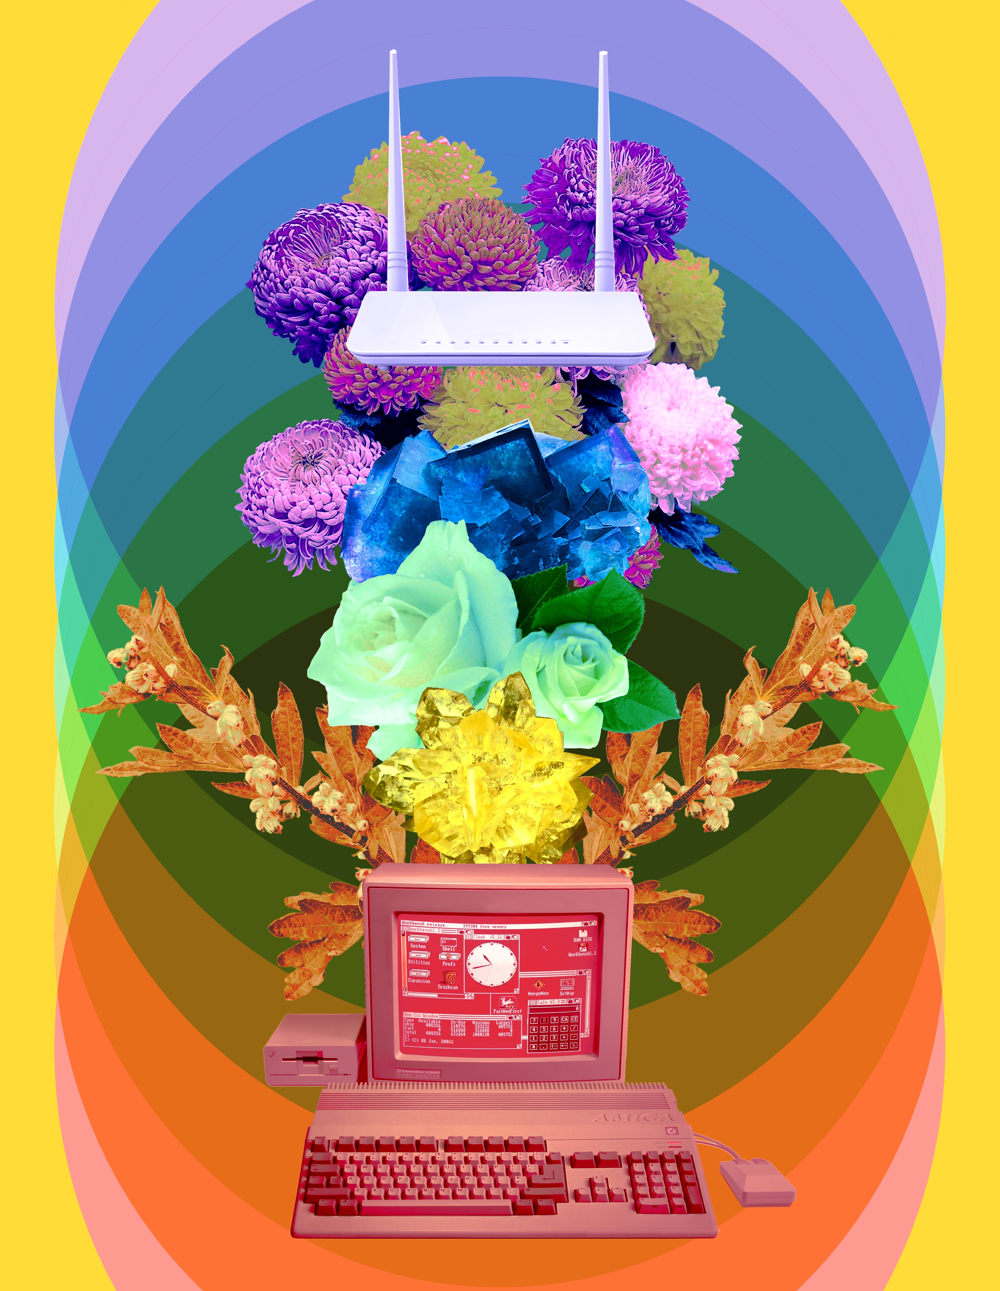 A tall image; a rainbow in the background created by overlapping colored circles. The foreground contains, from top to bottom, a sleek router, several chrysanthemum, crystals, a white rose, and an old desktop computer with a mouse and keyboard.